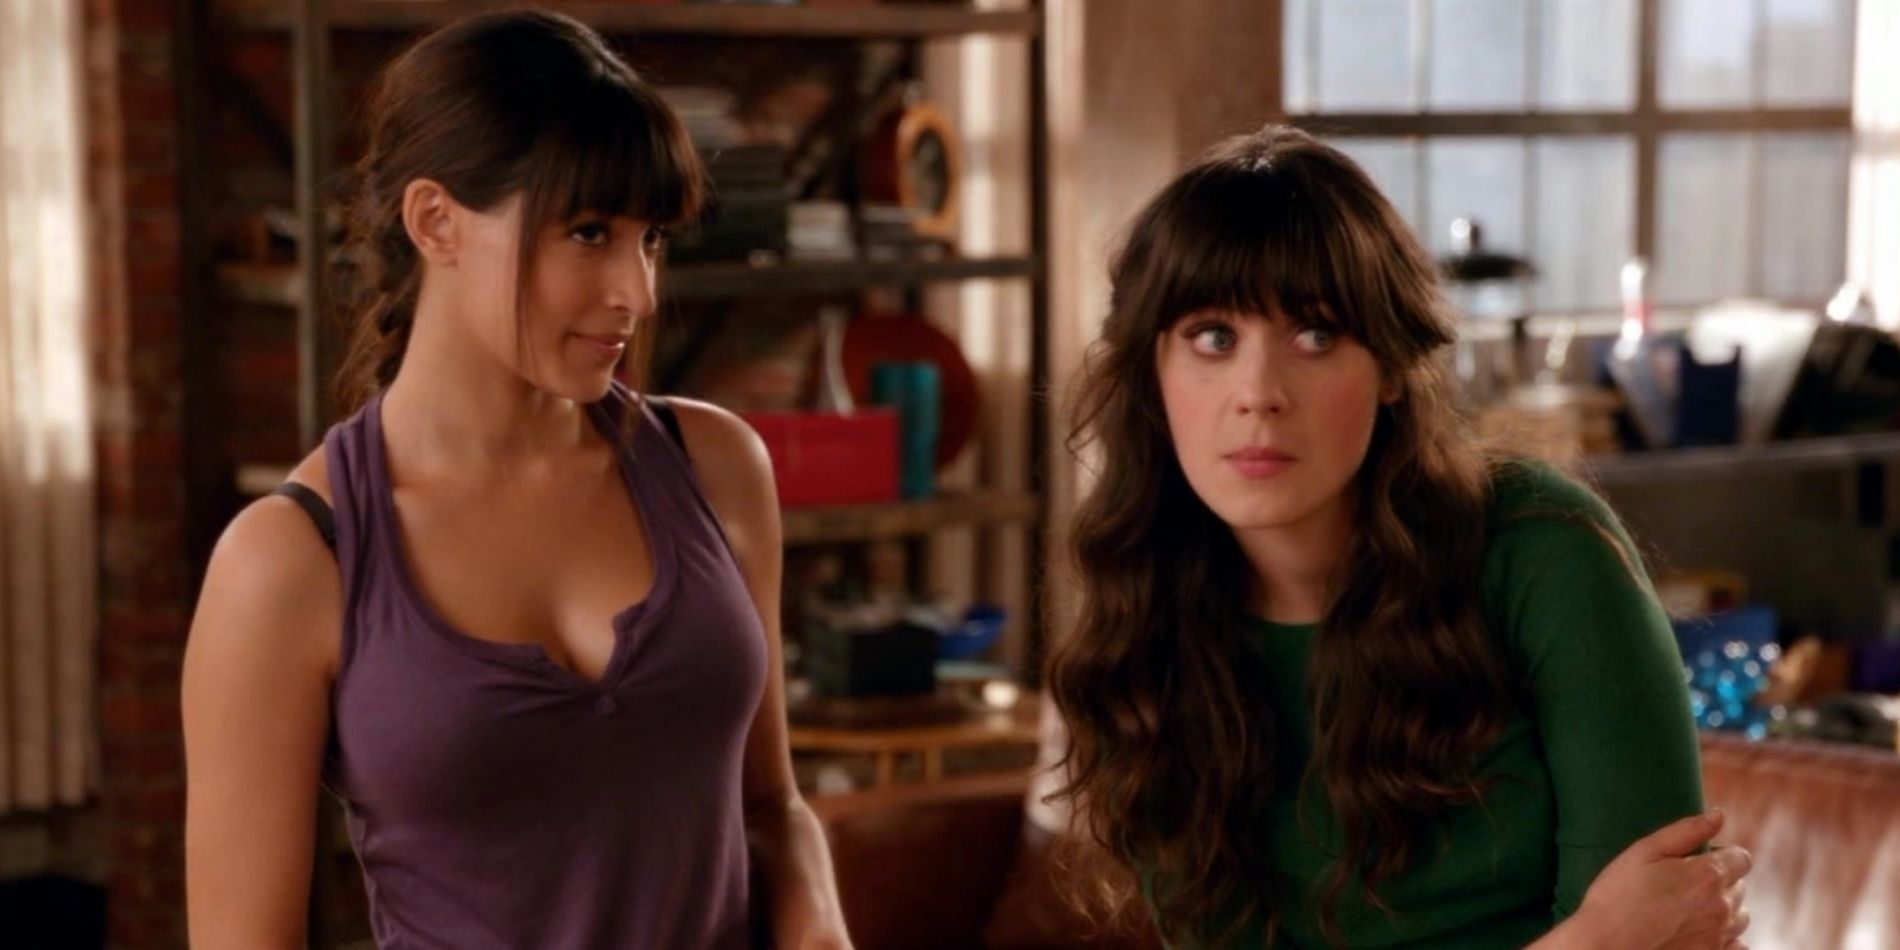 Cece watches Jess squirm in the living room in New Girl